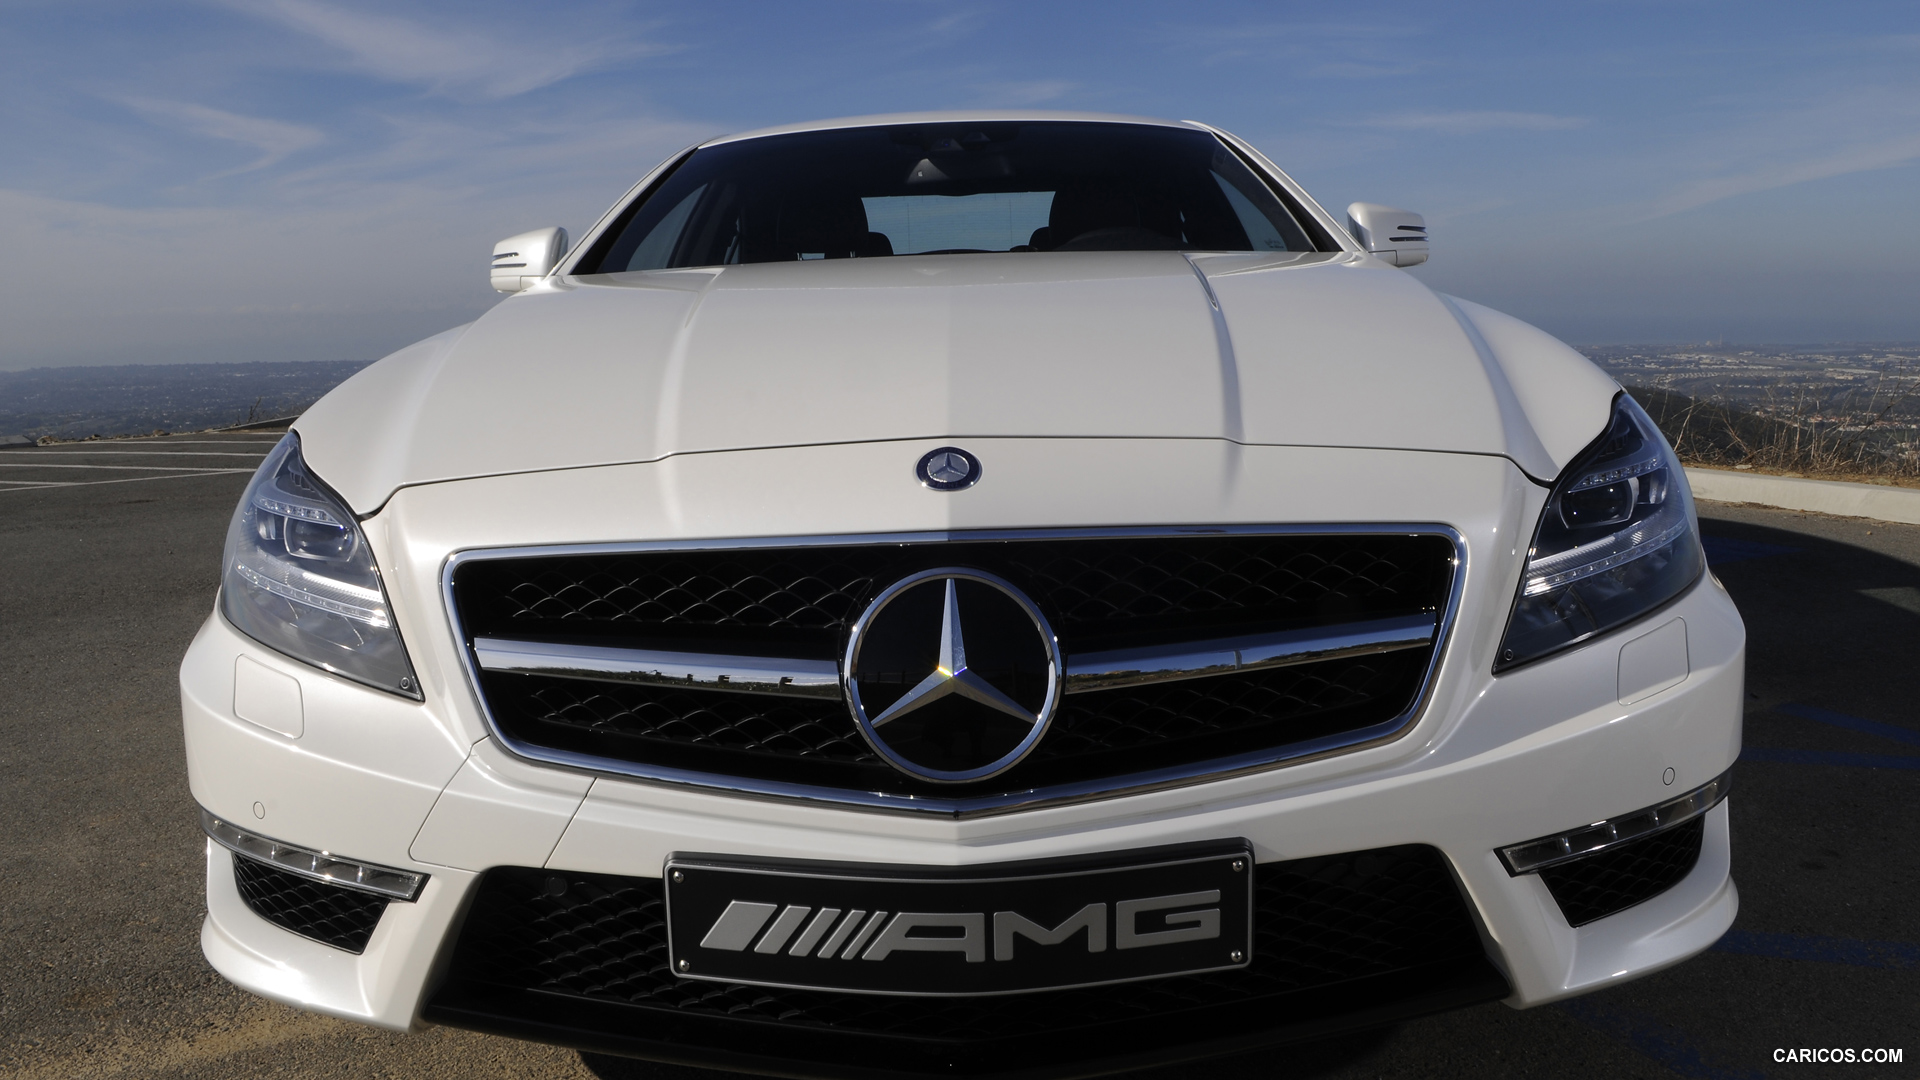 Mercedes-Benz CLS63 AMG (2012) US-Version - Diamond White - Front , #28 of 100